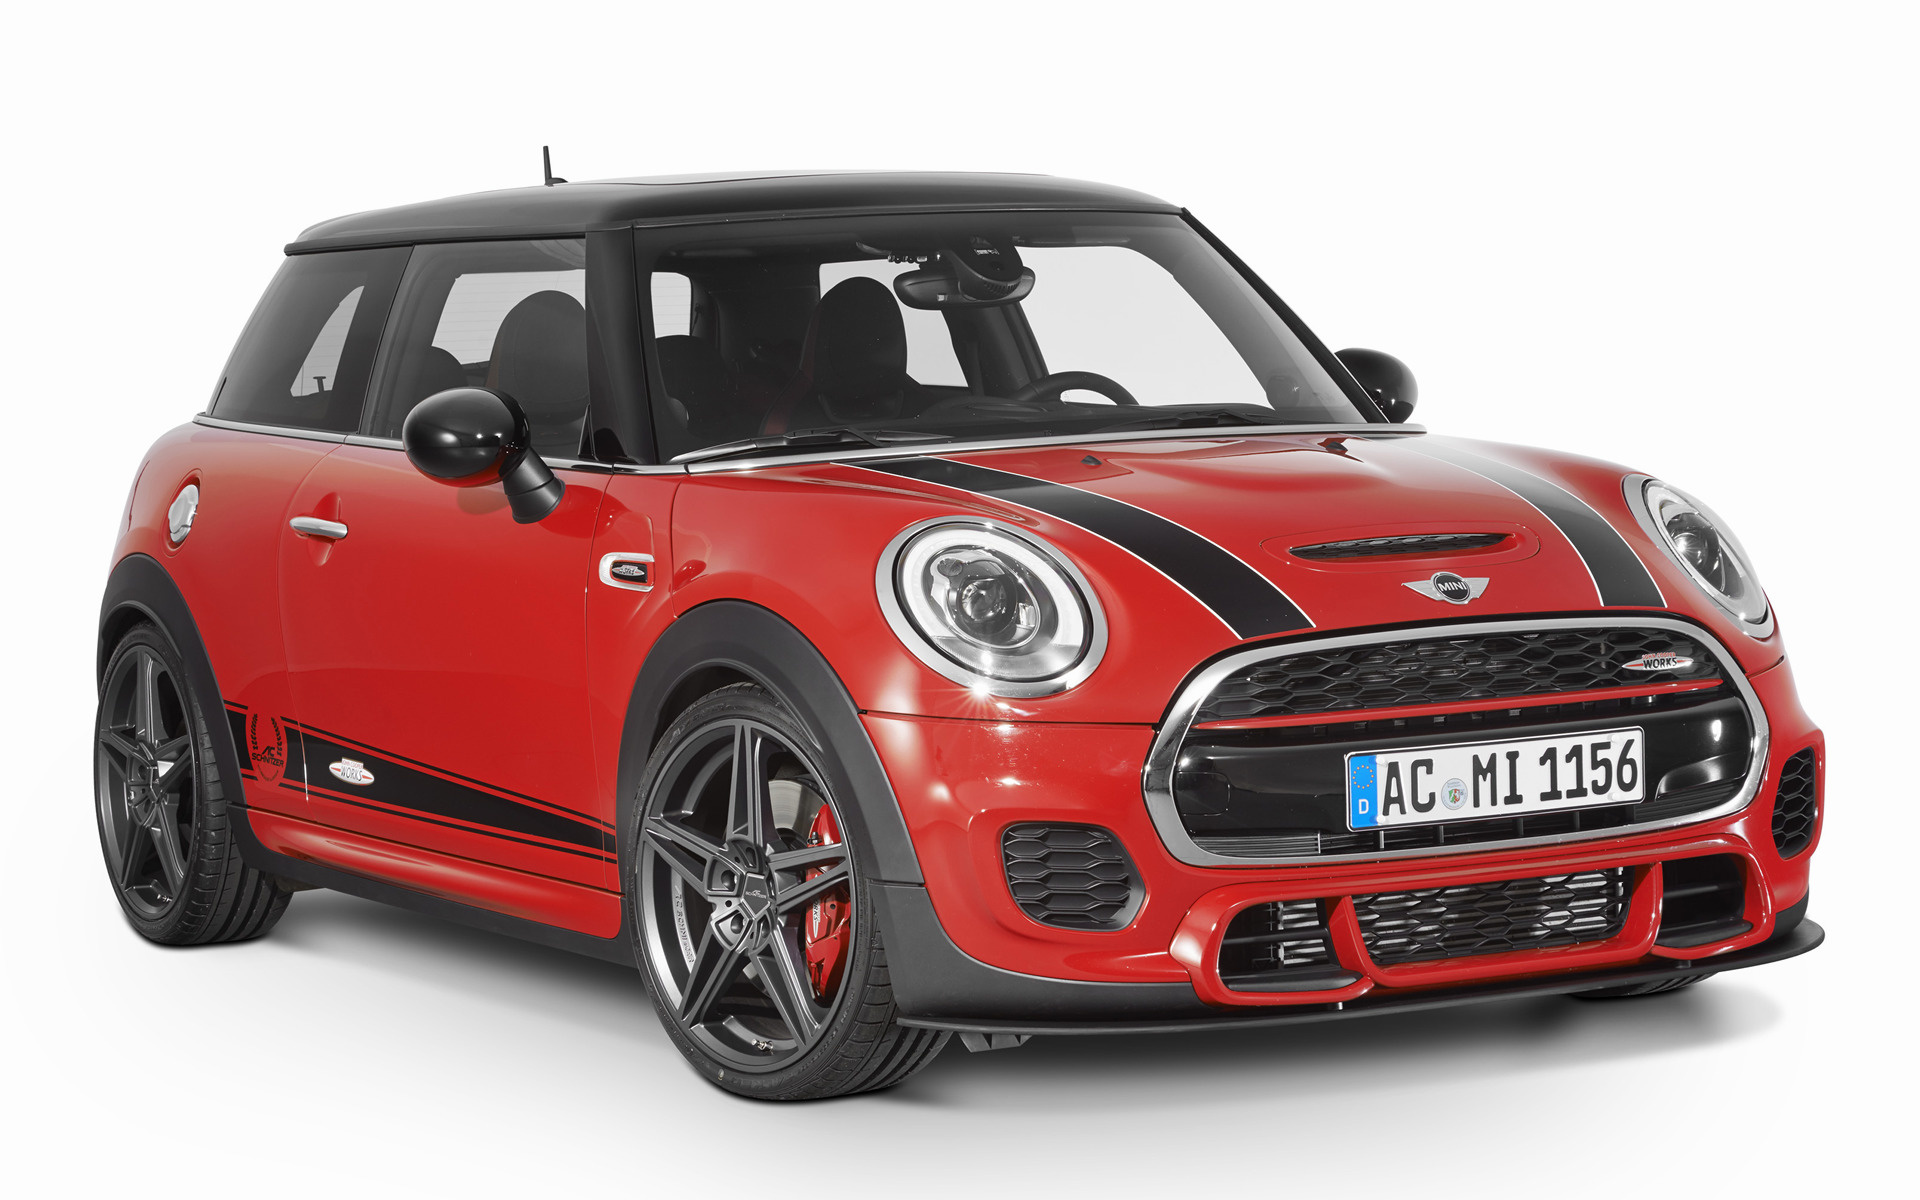 2015 Mini John Cooper Works by AC Schnitzer - Wallpapers and HD Images ...